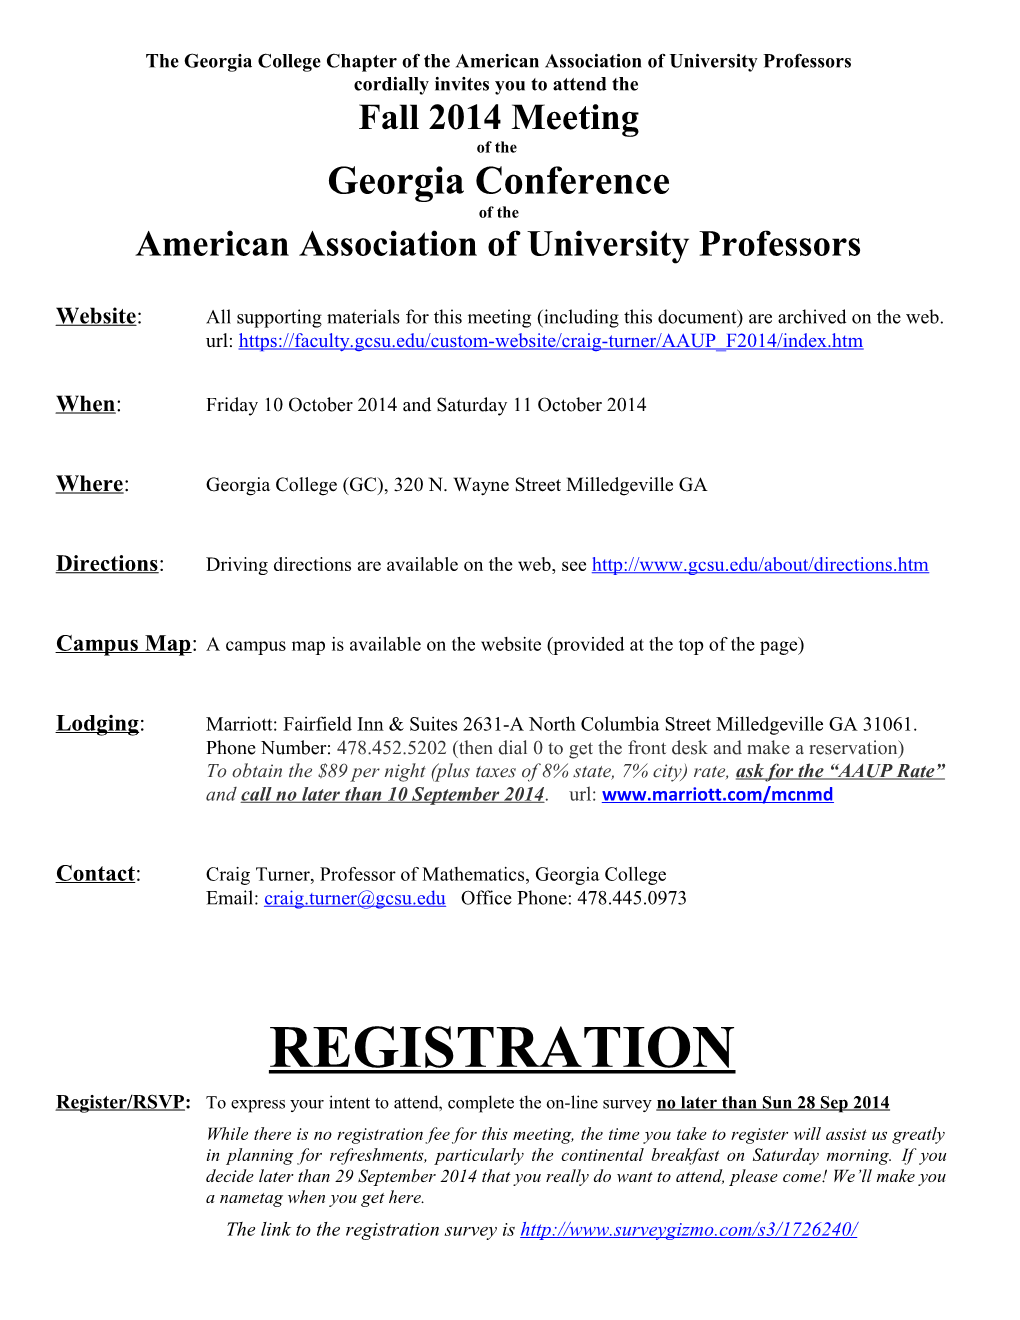 The Georgia College Chapter of the American Association of University Professors